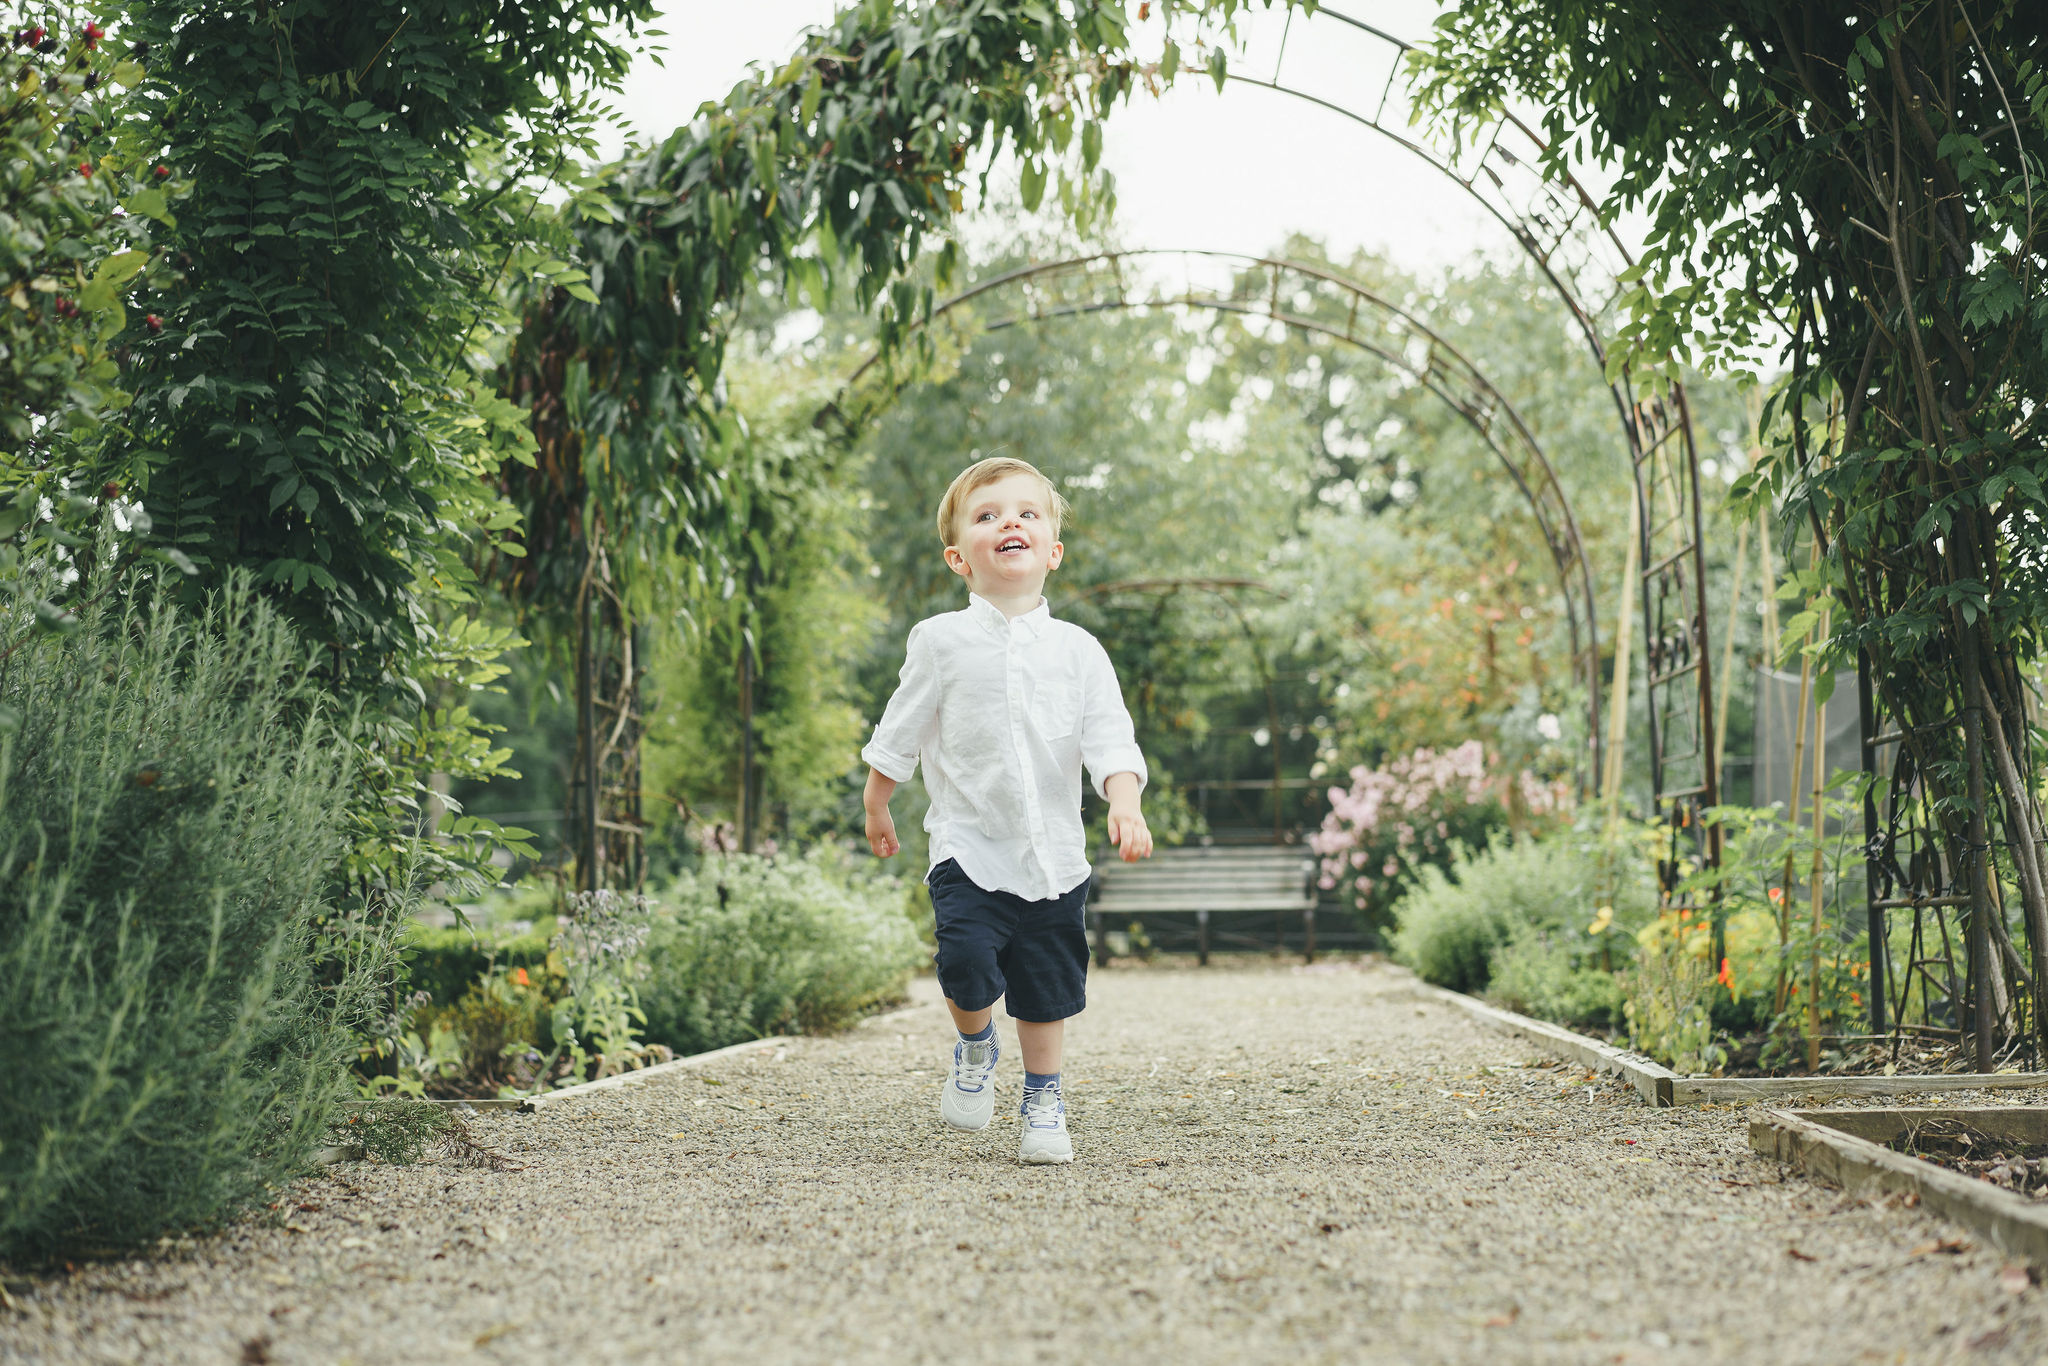 <p>The most important guests of all, keep children entertained with our make your own menu.</p>
<p><a href="https://www.wynyardhall.co.uk/wp-content/uploads/2021/08/Childrens-Menu-The-Glass-House.pdf"><strong>View Sample Menu</strong></a></p>
